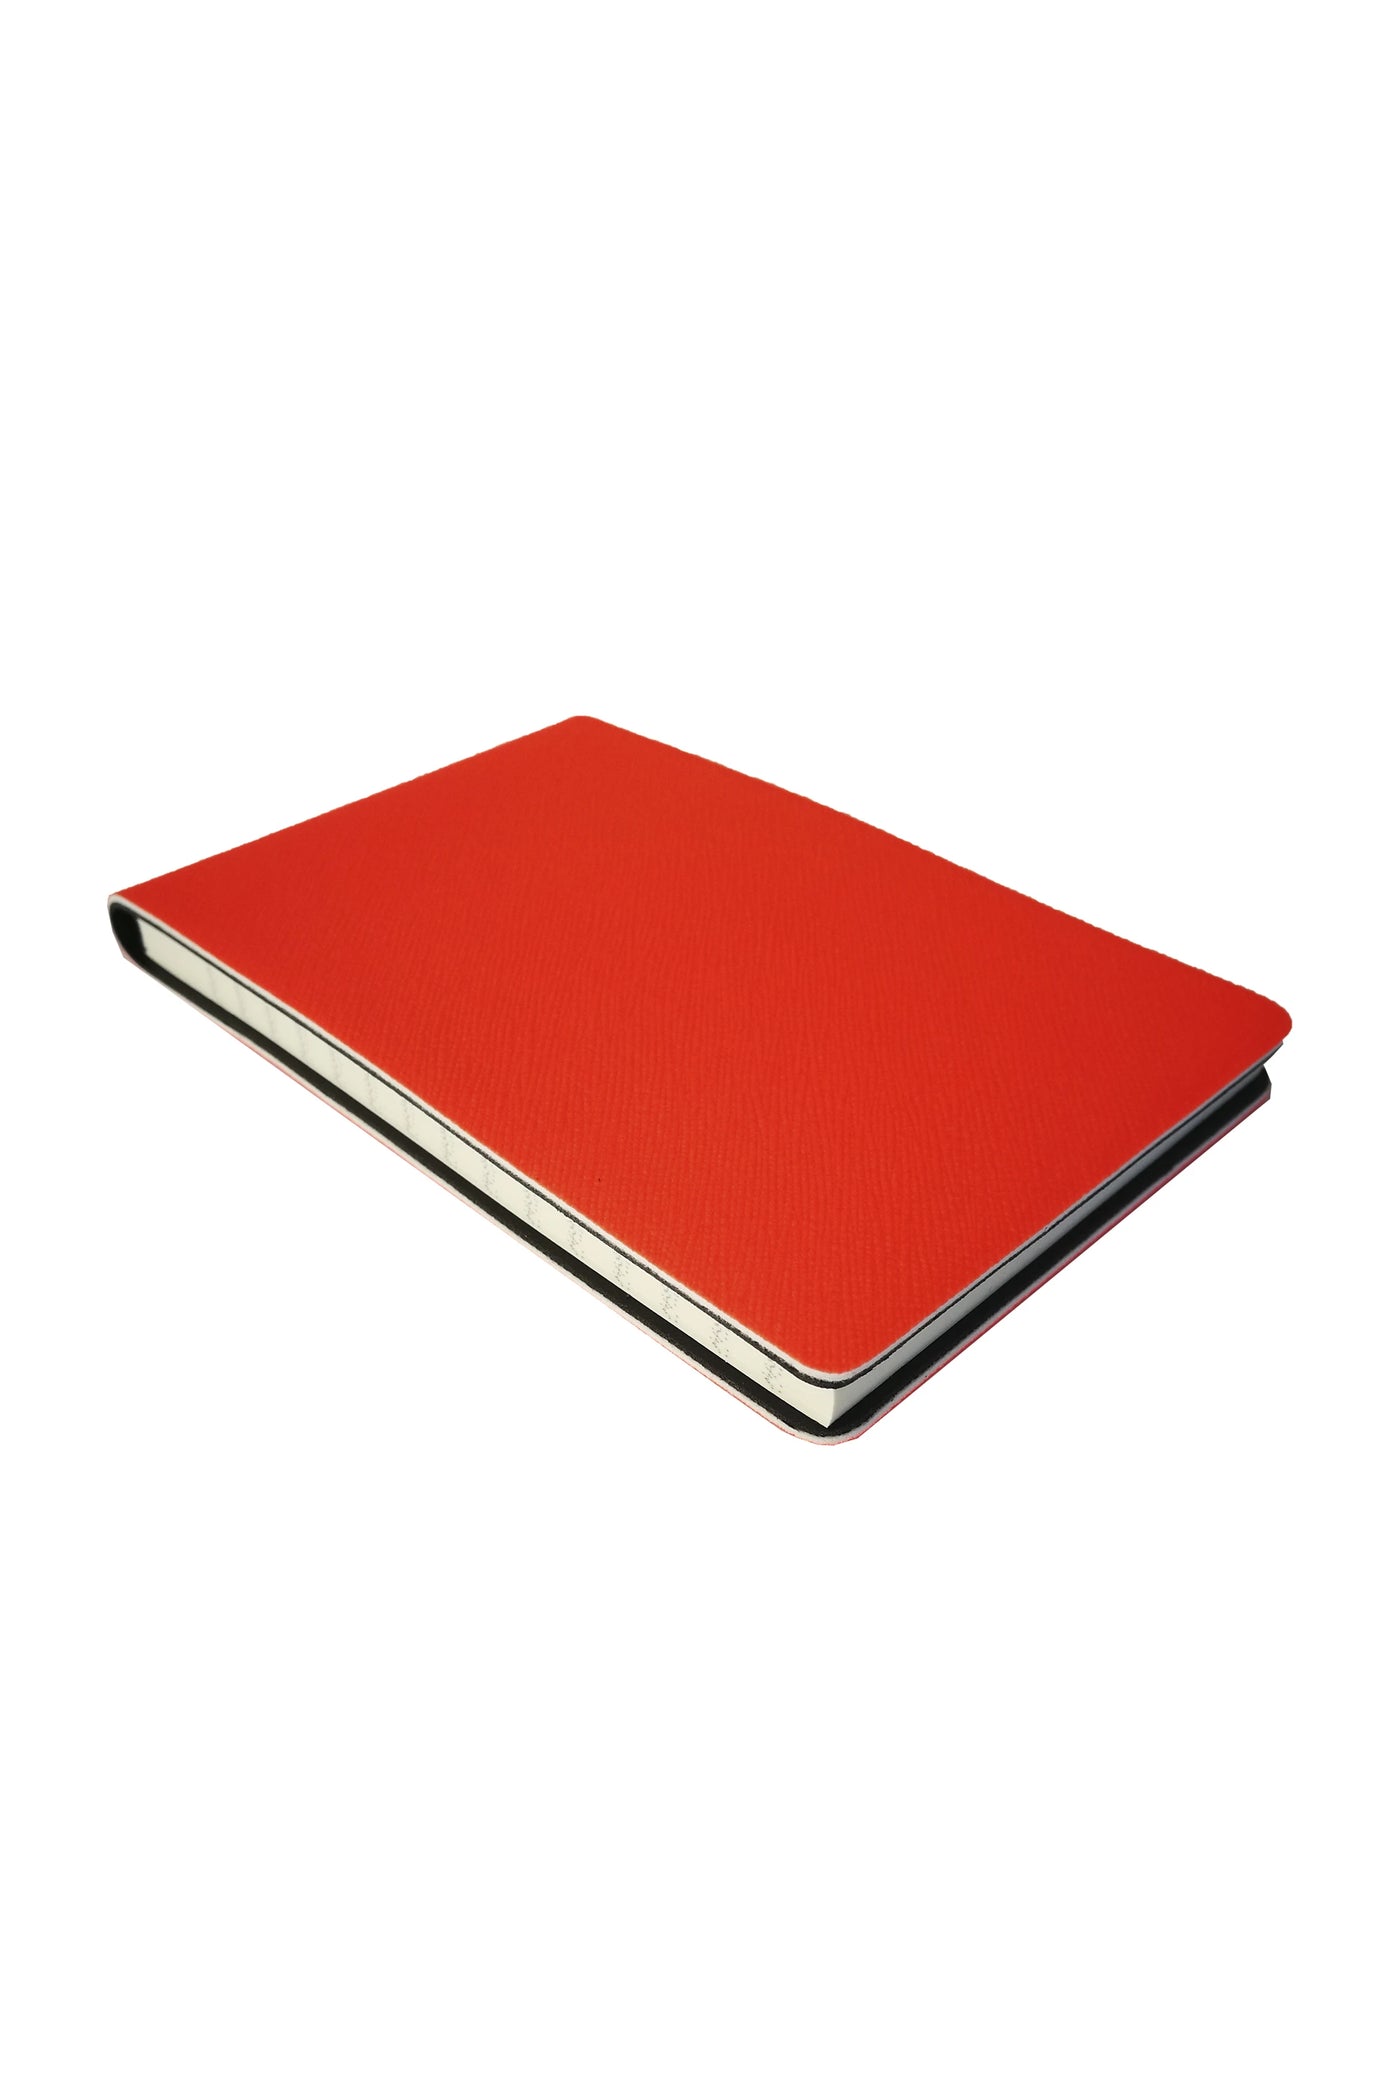 A6 Neon Textured Note Pad Lined